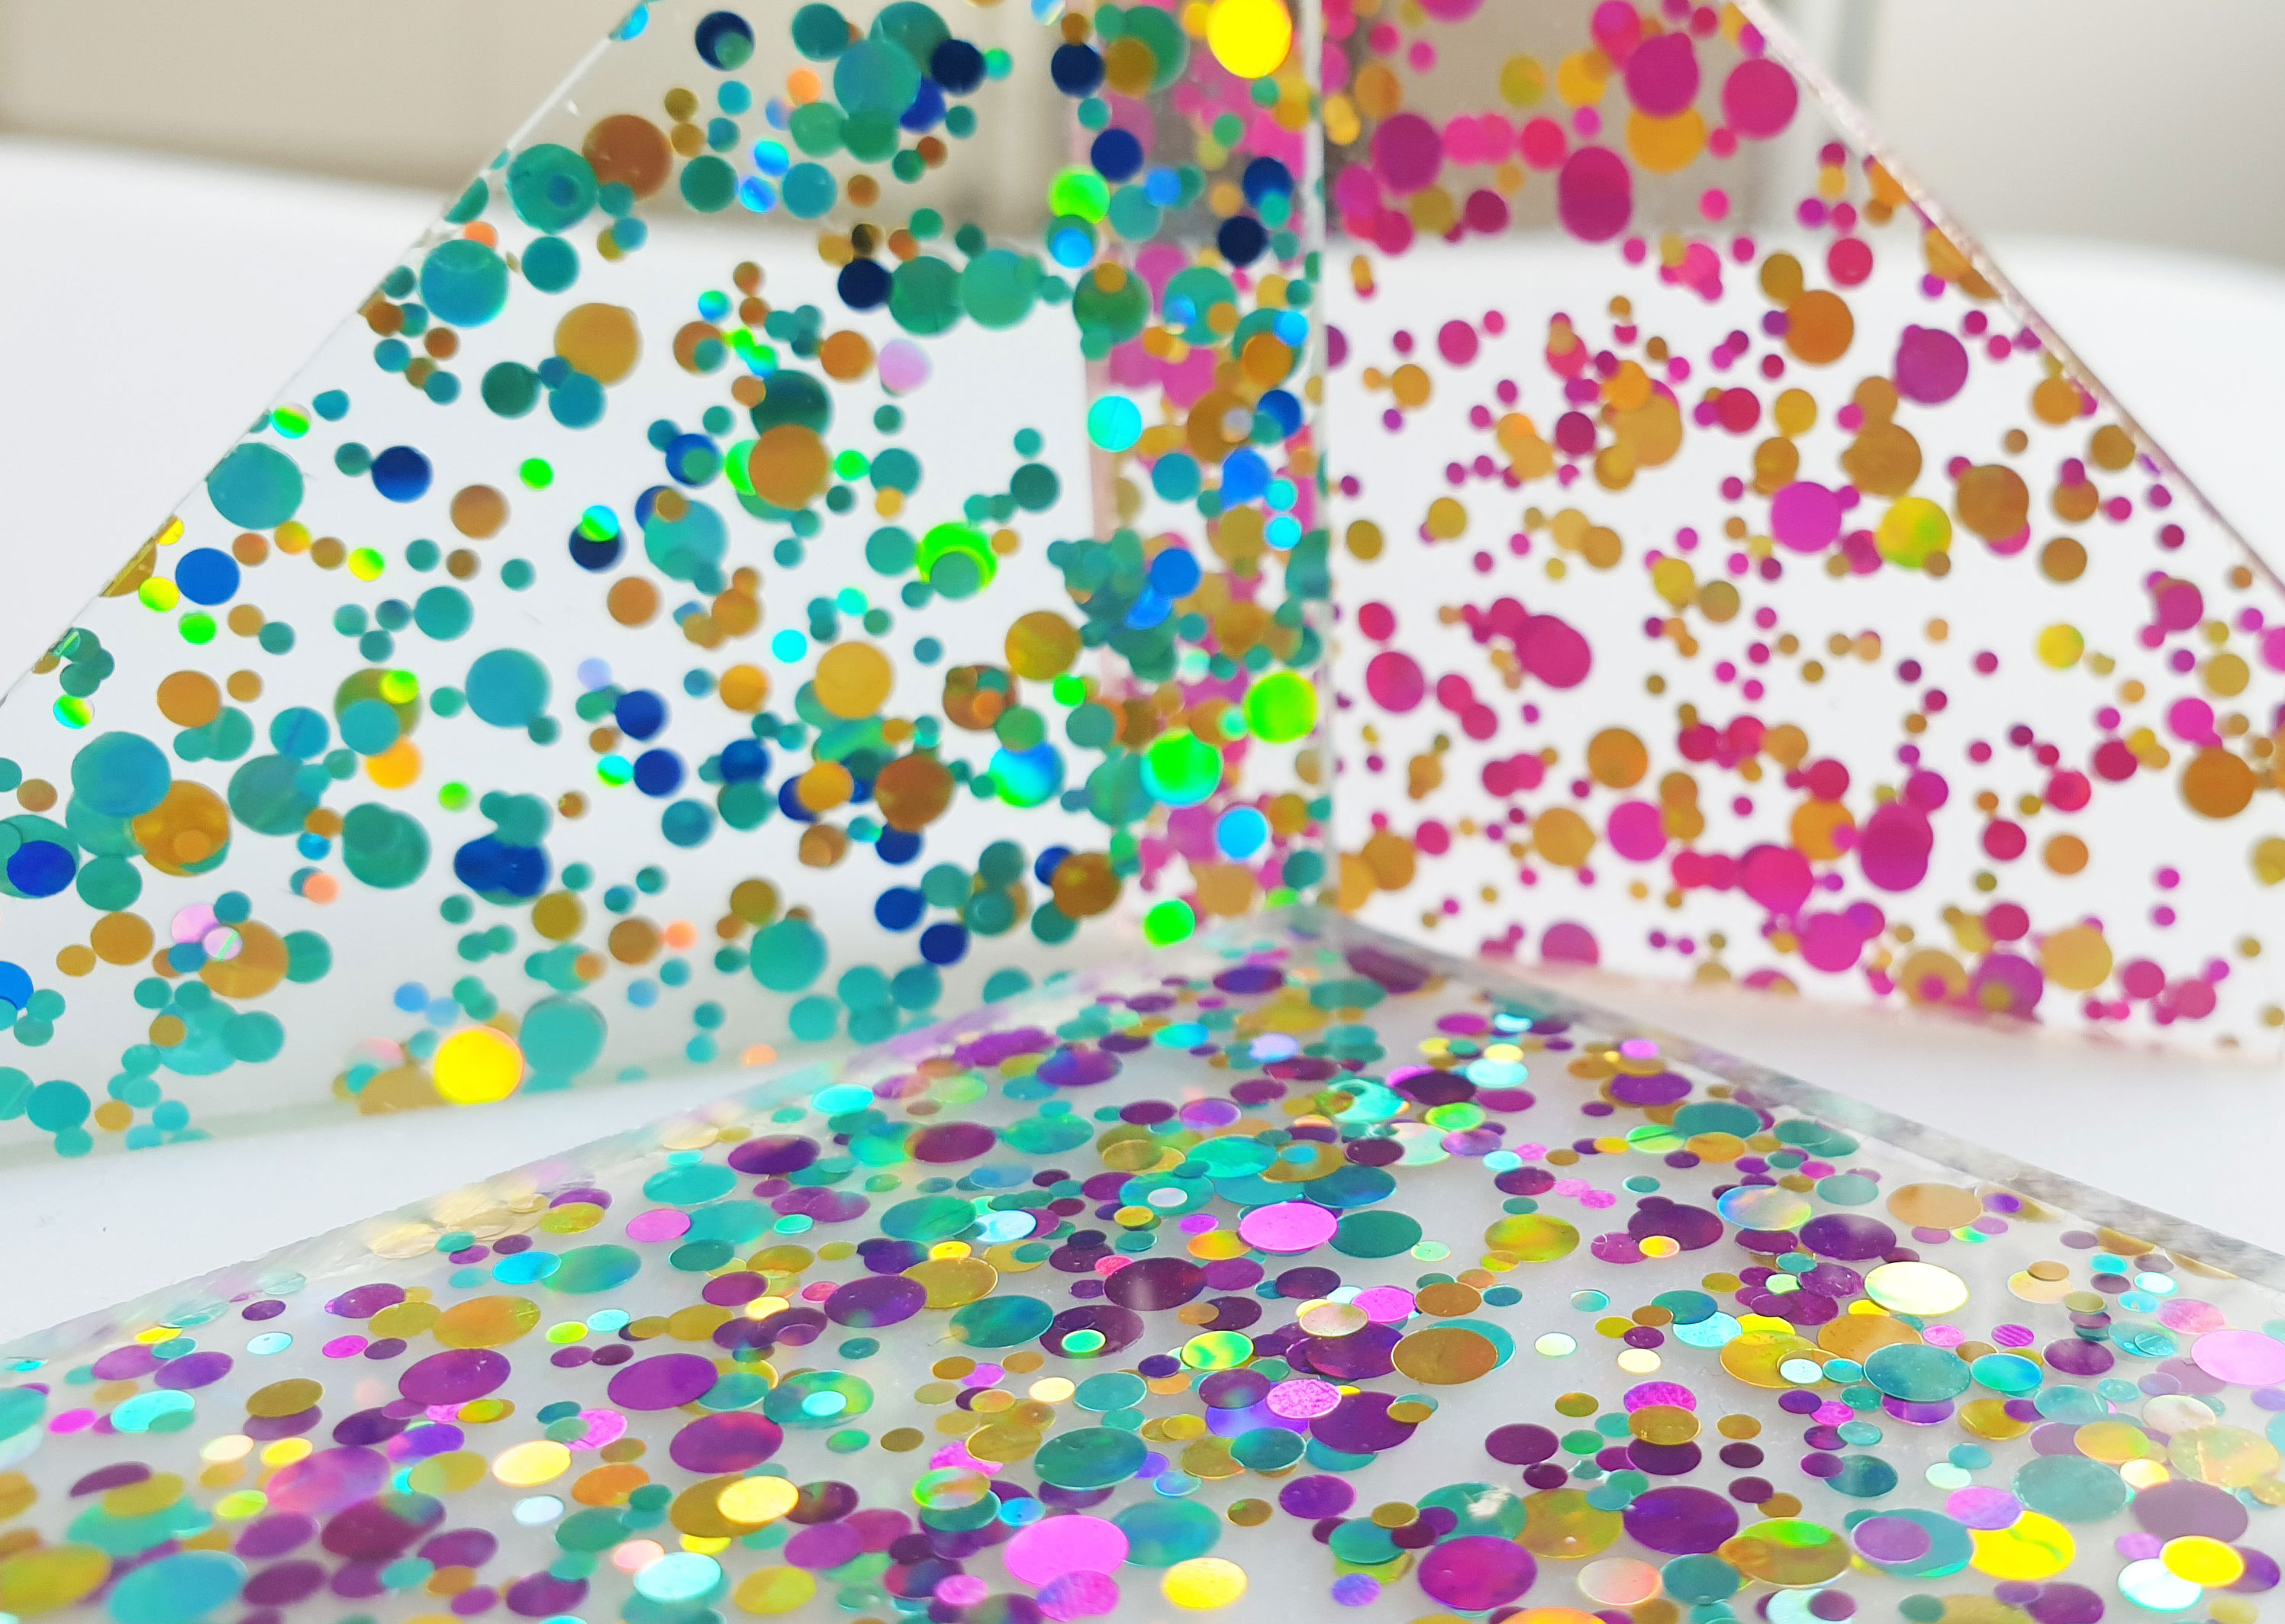 TroGlitter - glitter acrylic sheets for laser engraving and cutting